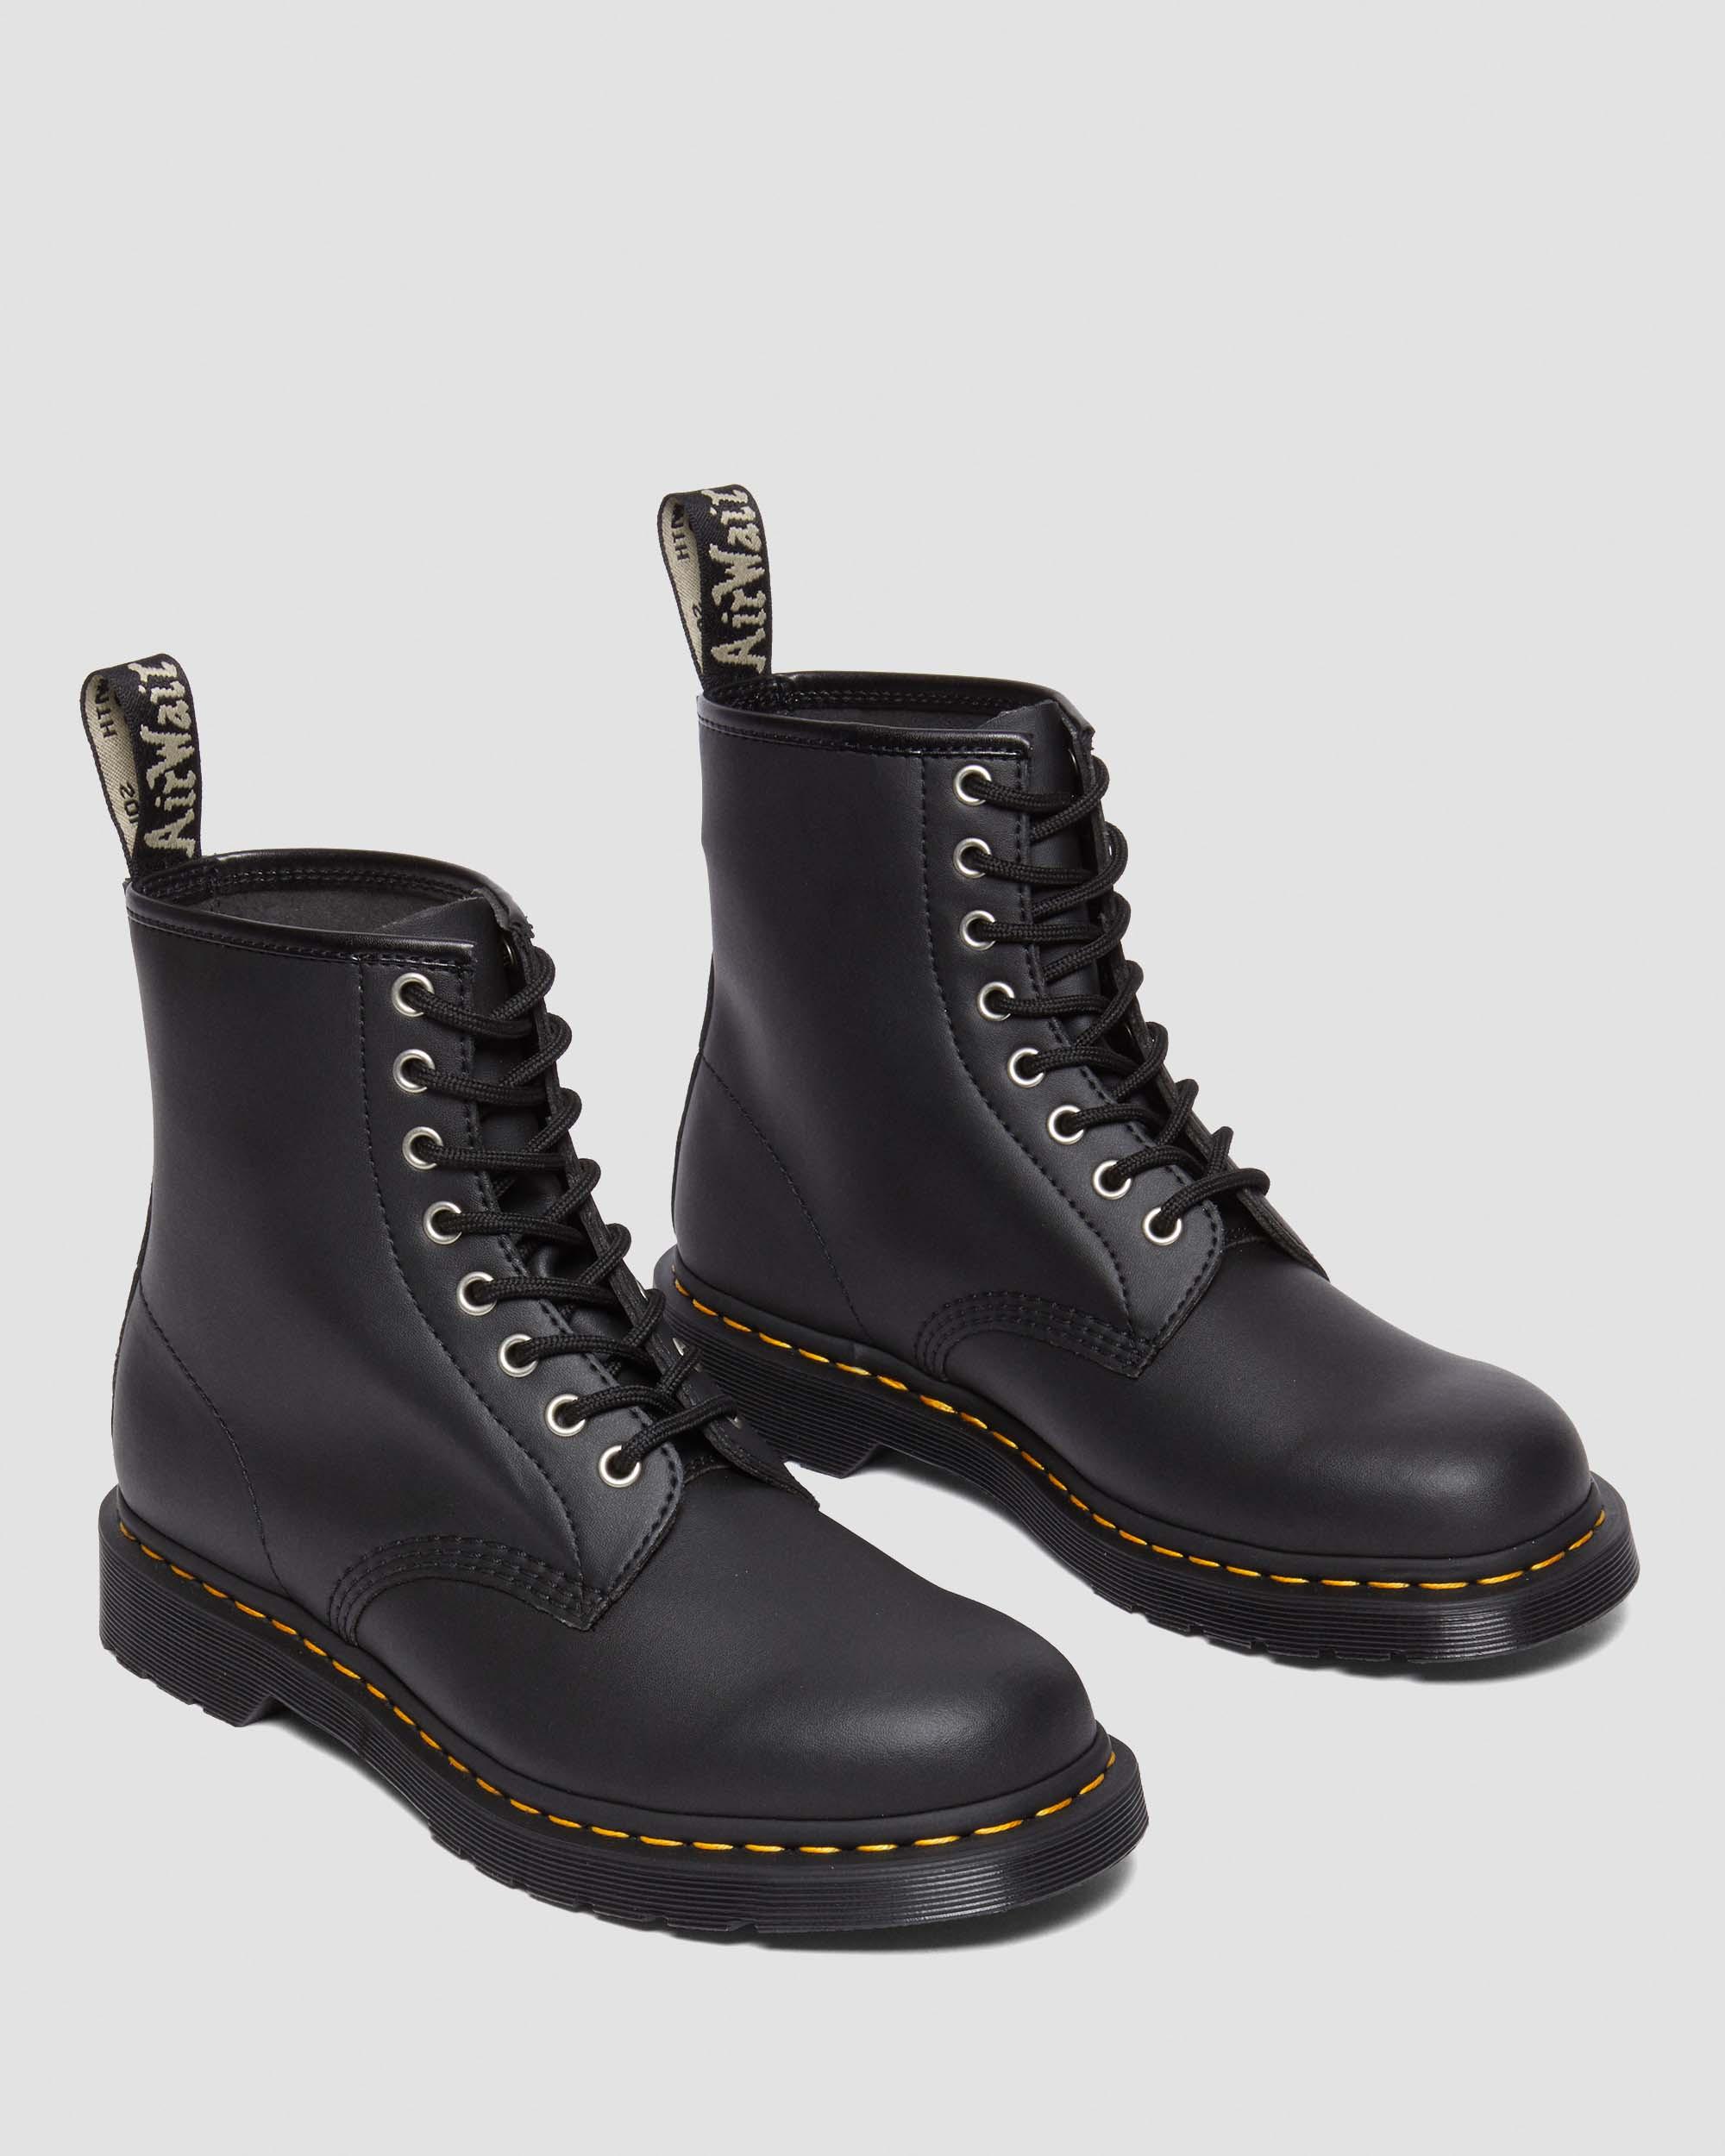 1460 Genix Nappa Reclaimed Leather Lace Up Boots in Black